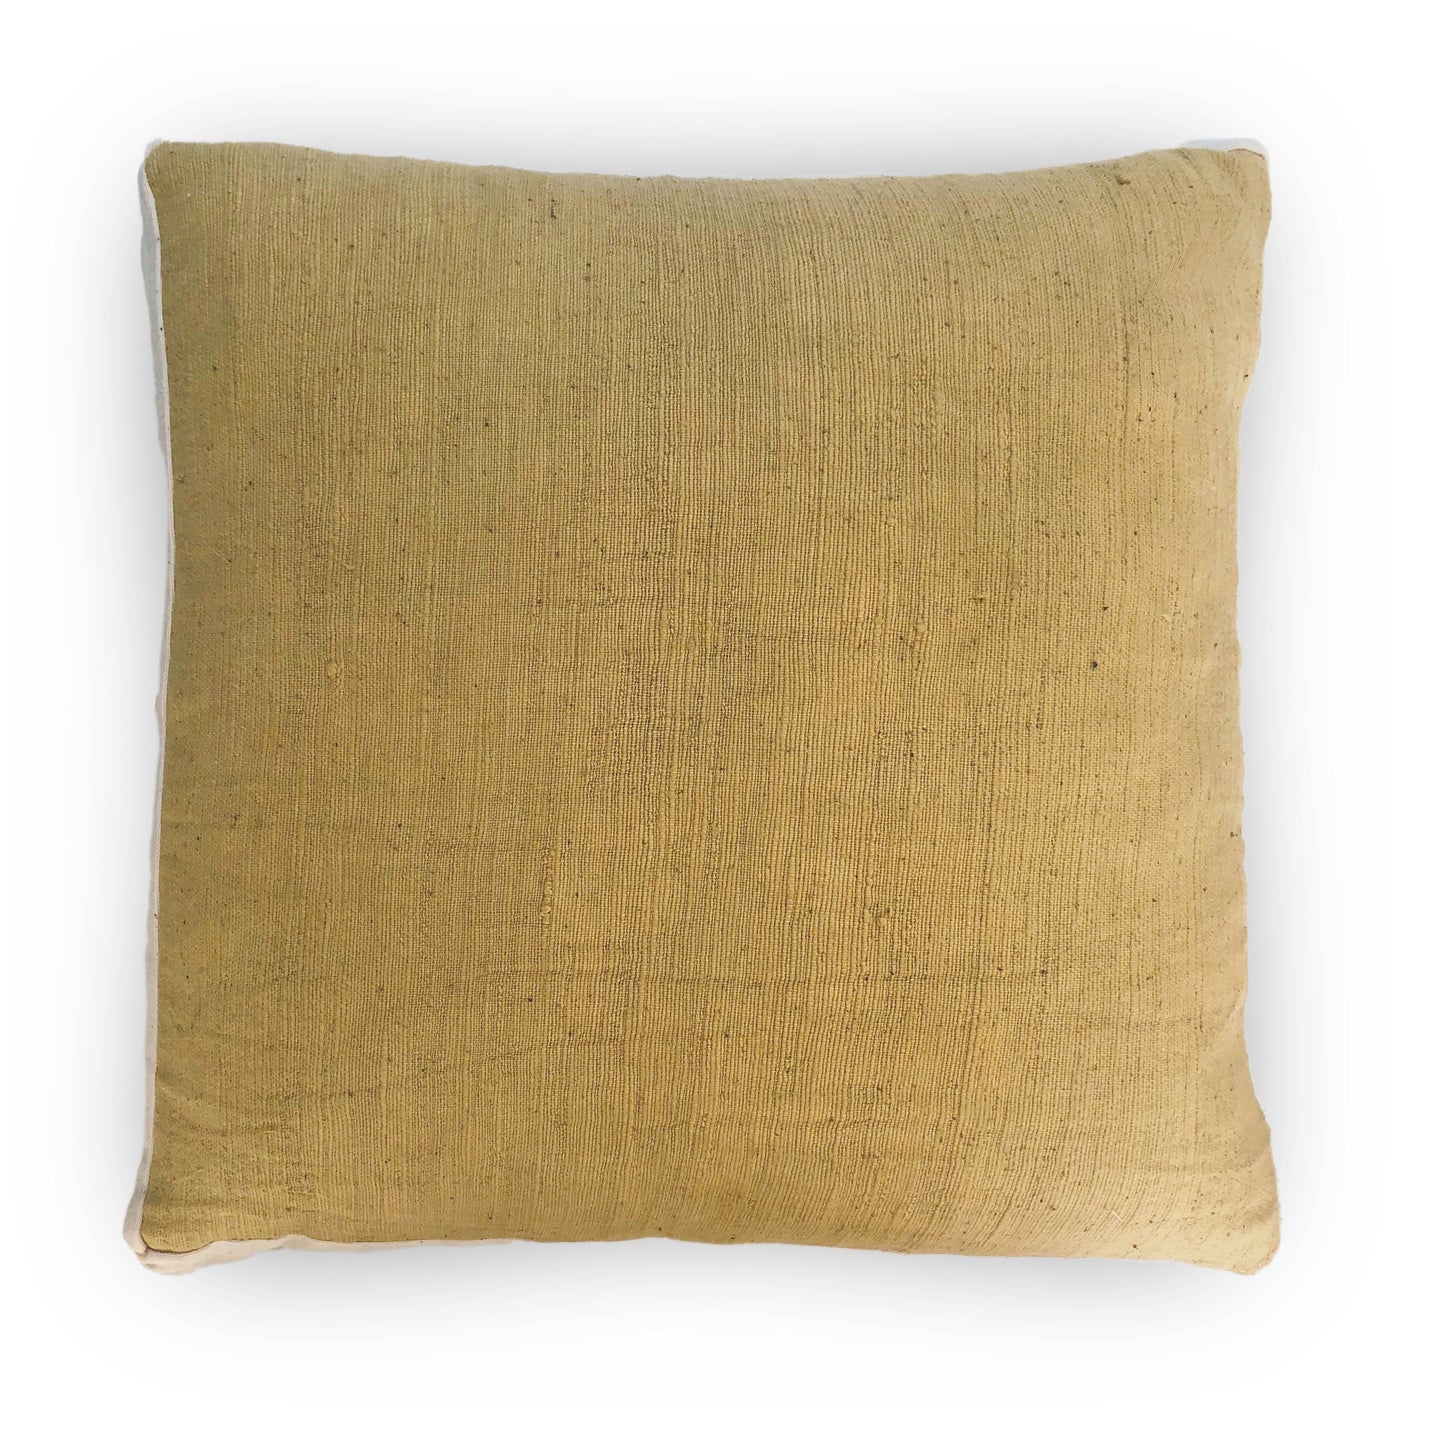 Mustard & White Contour Line Pillow 18x18in